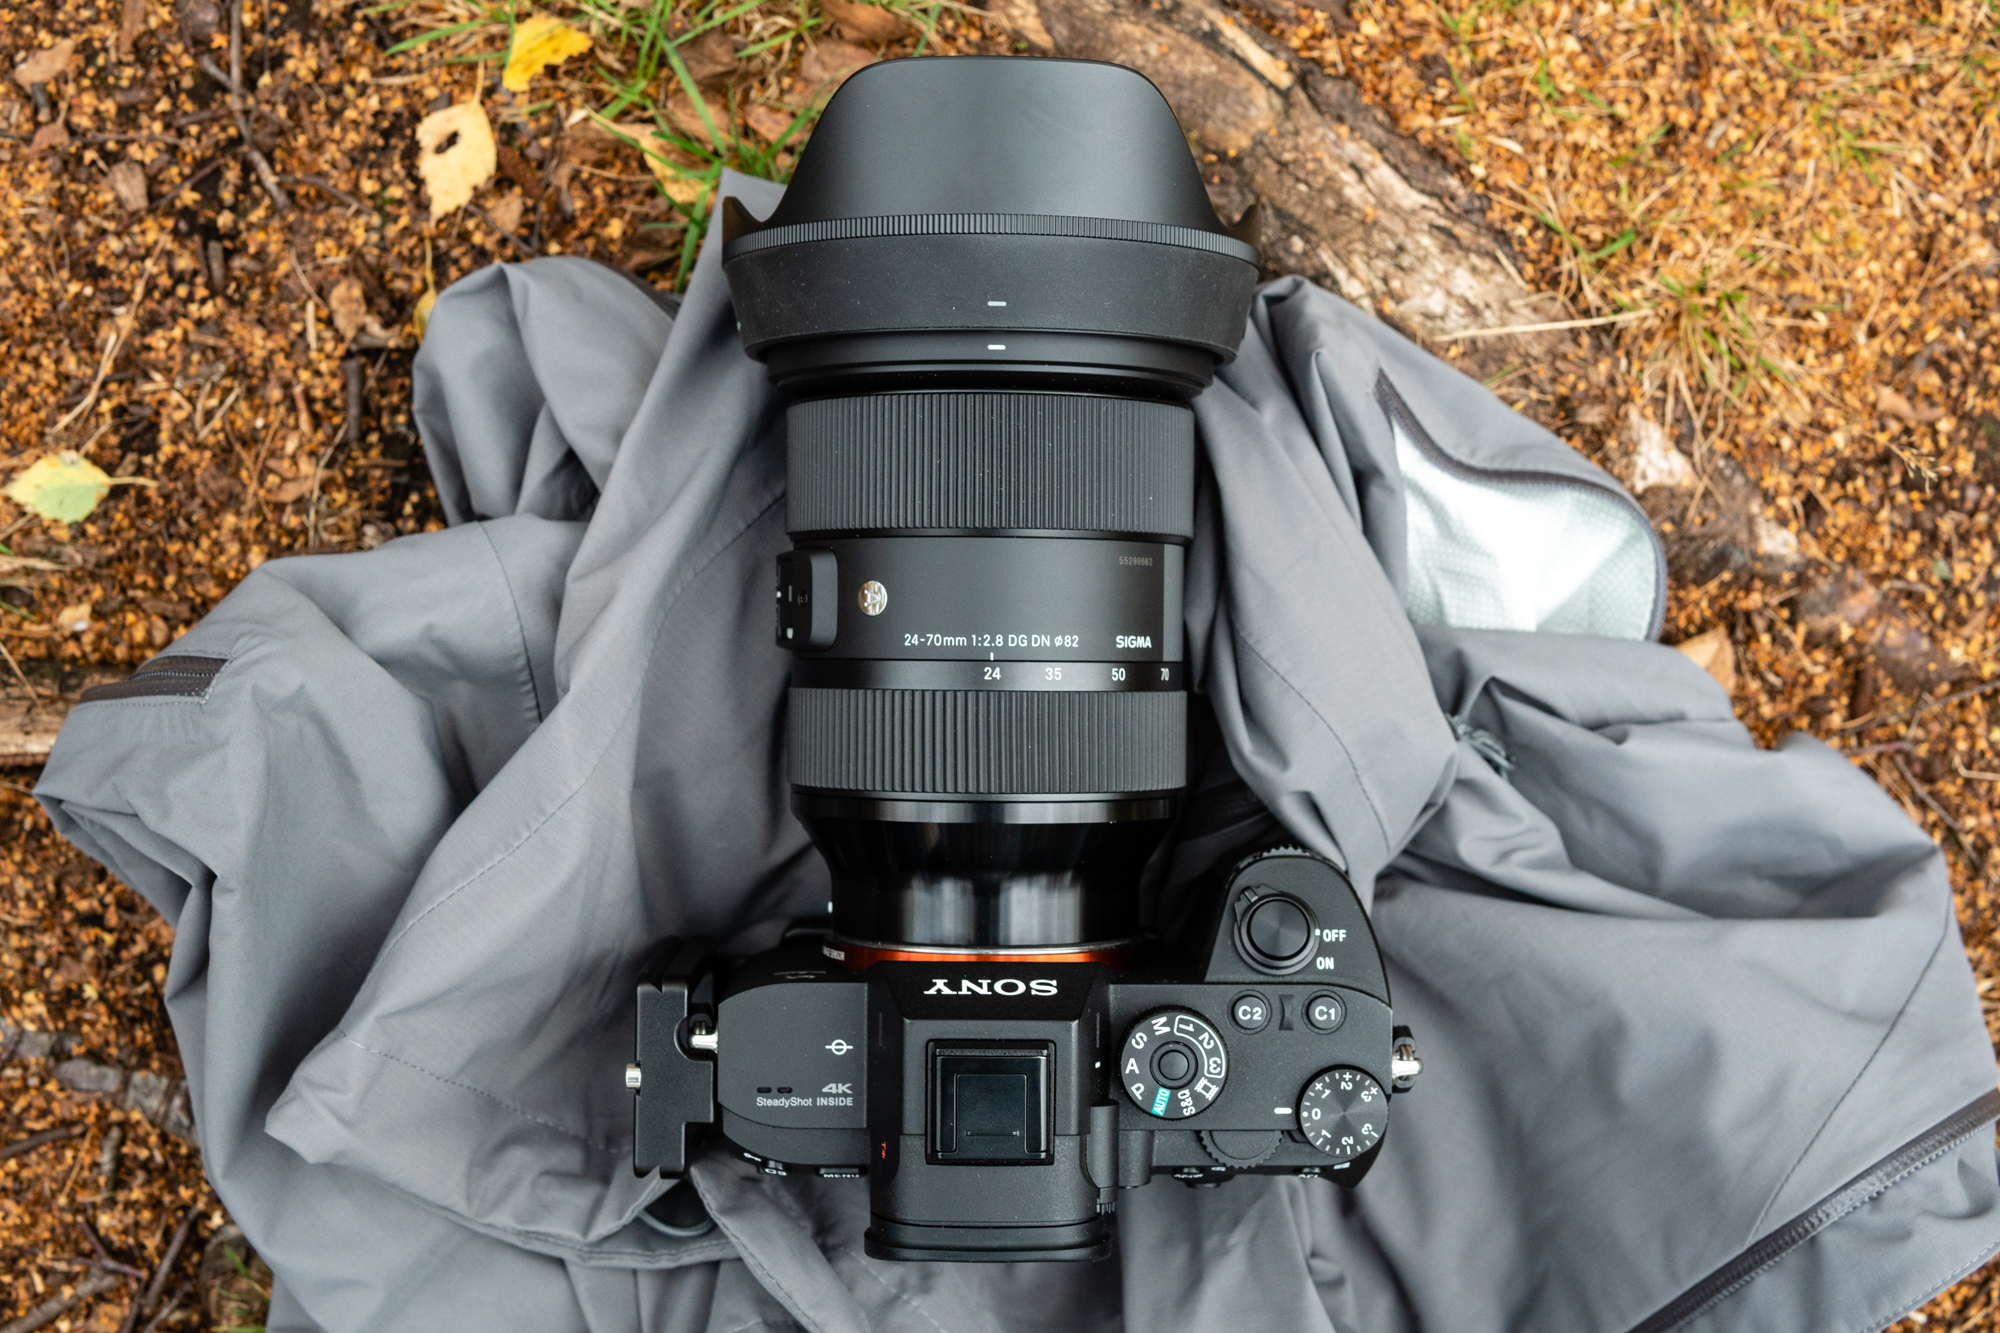 A camera on a rainjacket as an alternative method of support to a tripod